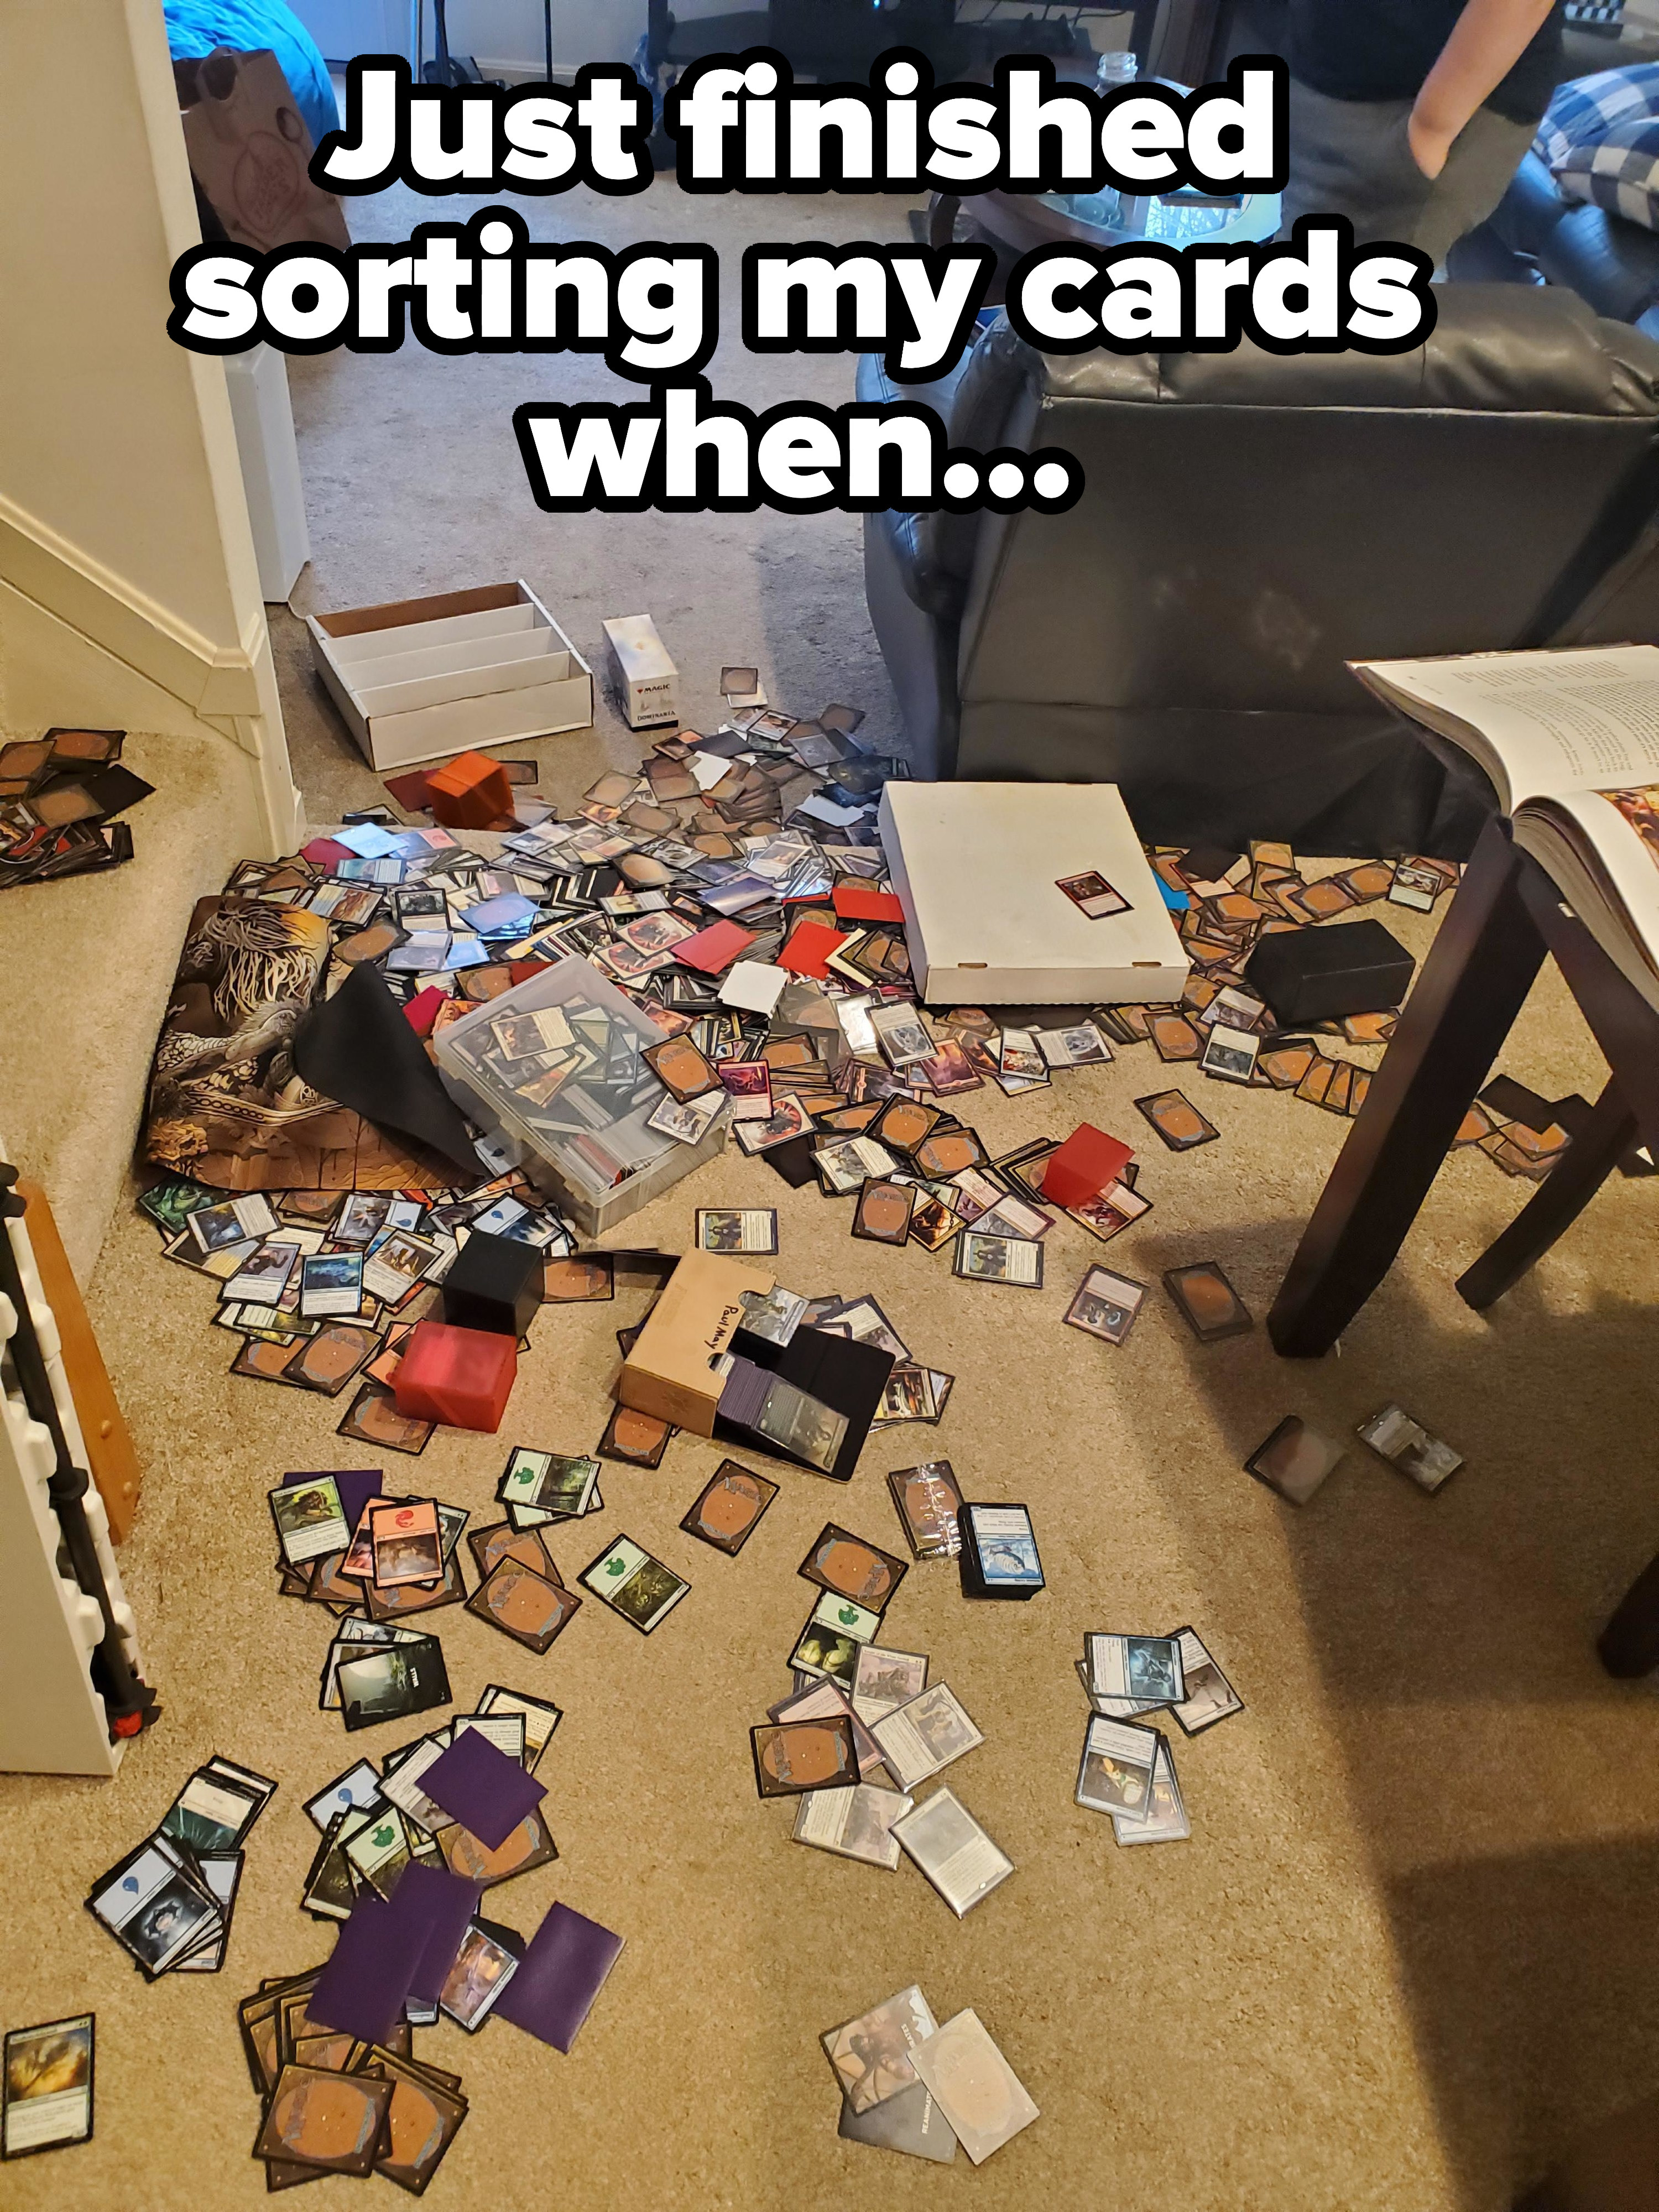 A ton of cards strewn about a floor with caption &quot;Just finished sorting my cards&quot;